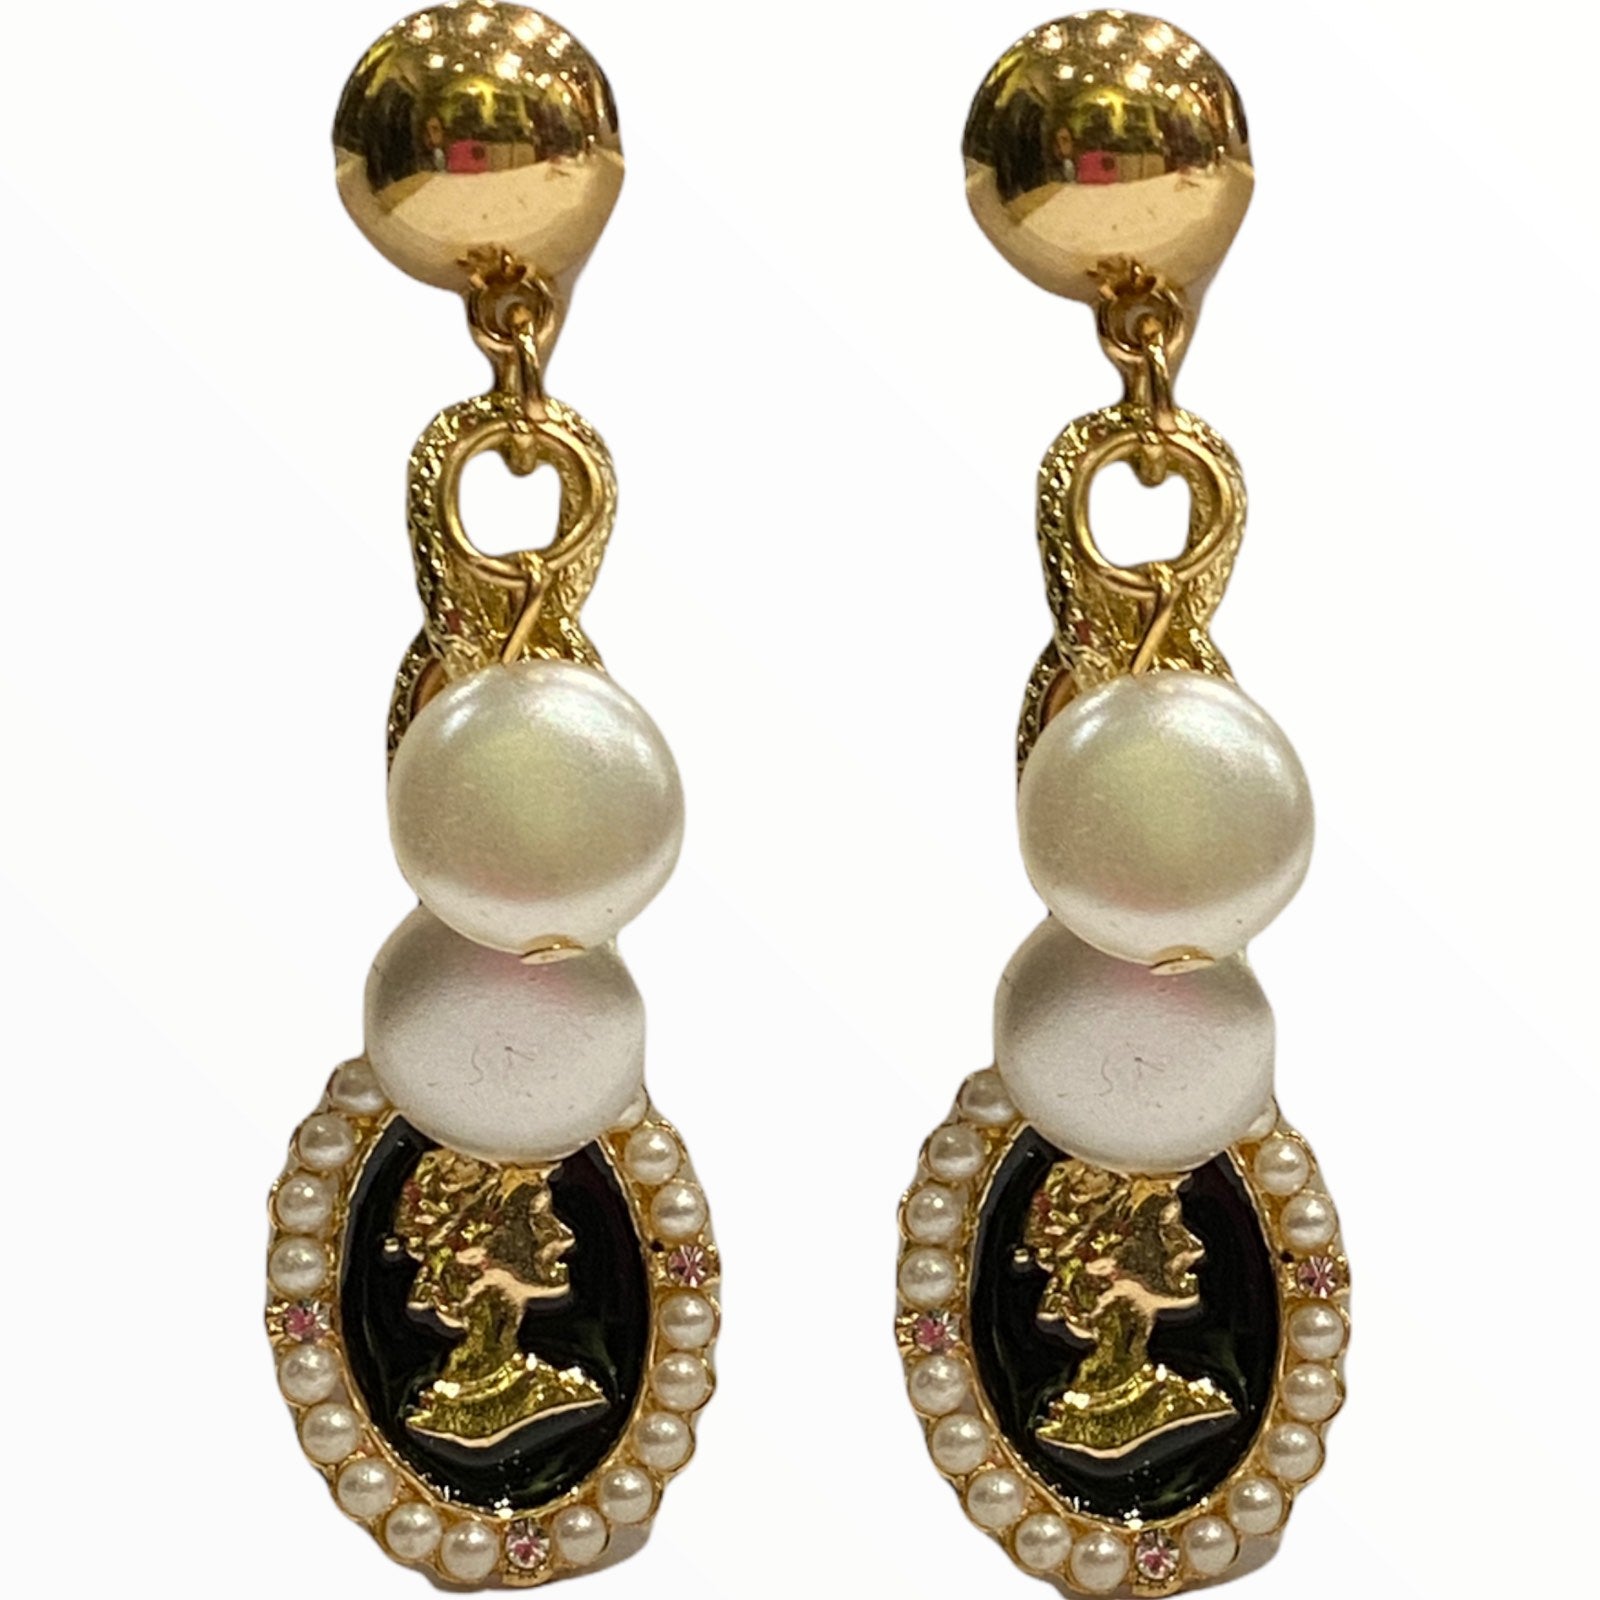 Gold ultra chic earrings with pearls